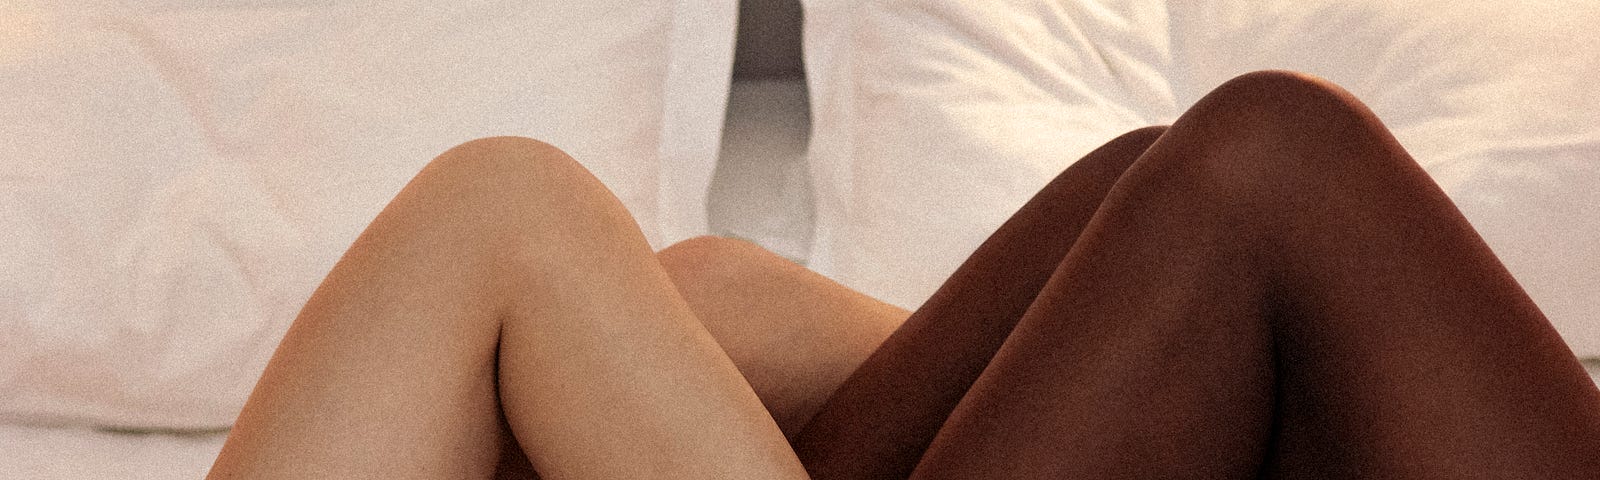 The intertwined legs of two sexy women in bed